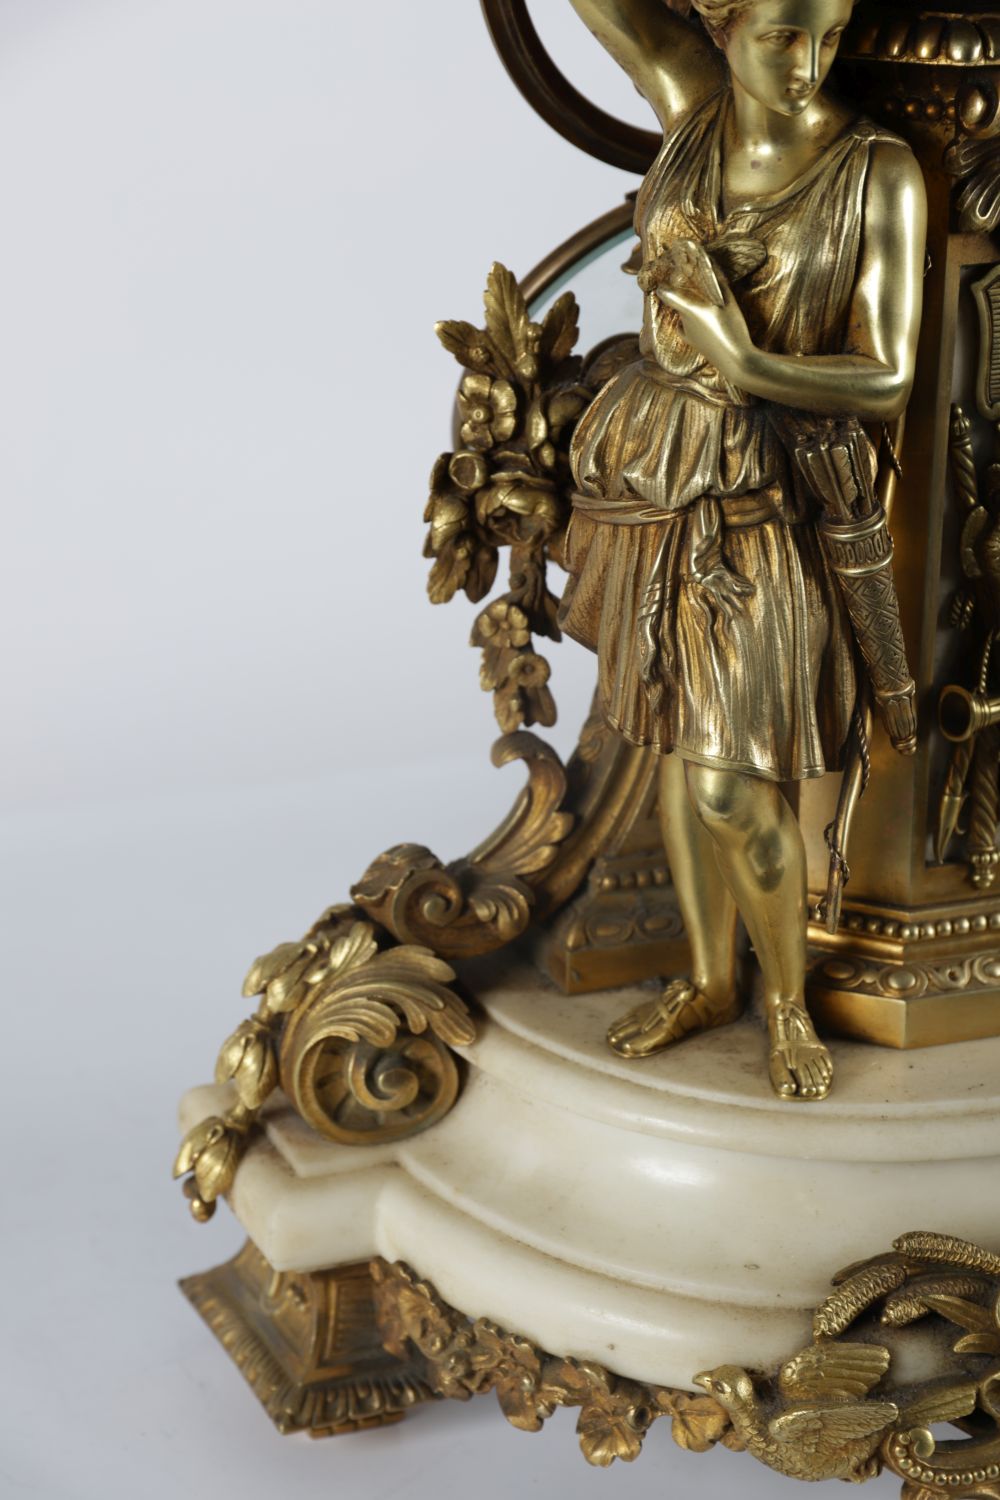 19TH-CENTURY FRENCH ORMOLU MARBLE CLOCK - Image 4 of 4